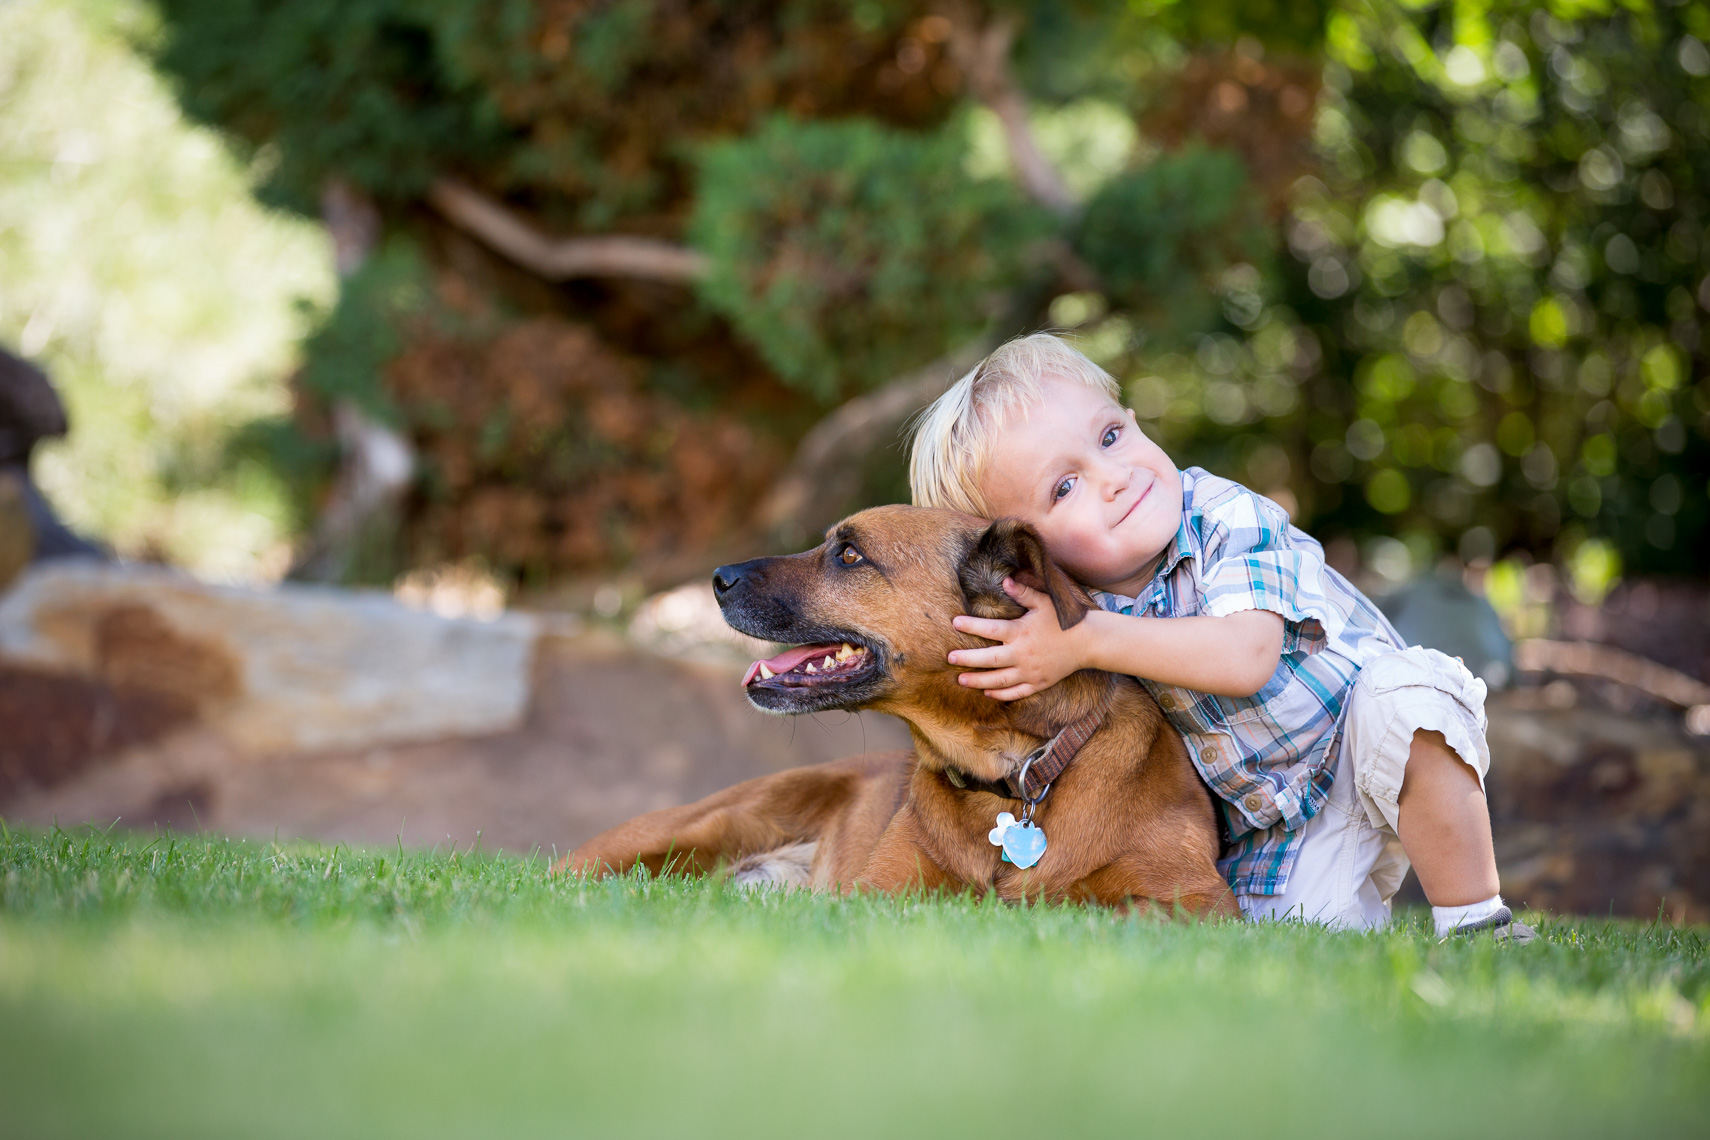 Kid with rare disease playing in the backyard with their dog. Photographed by healthcare advertising photographer Robert Houser